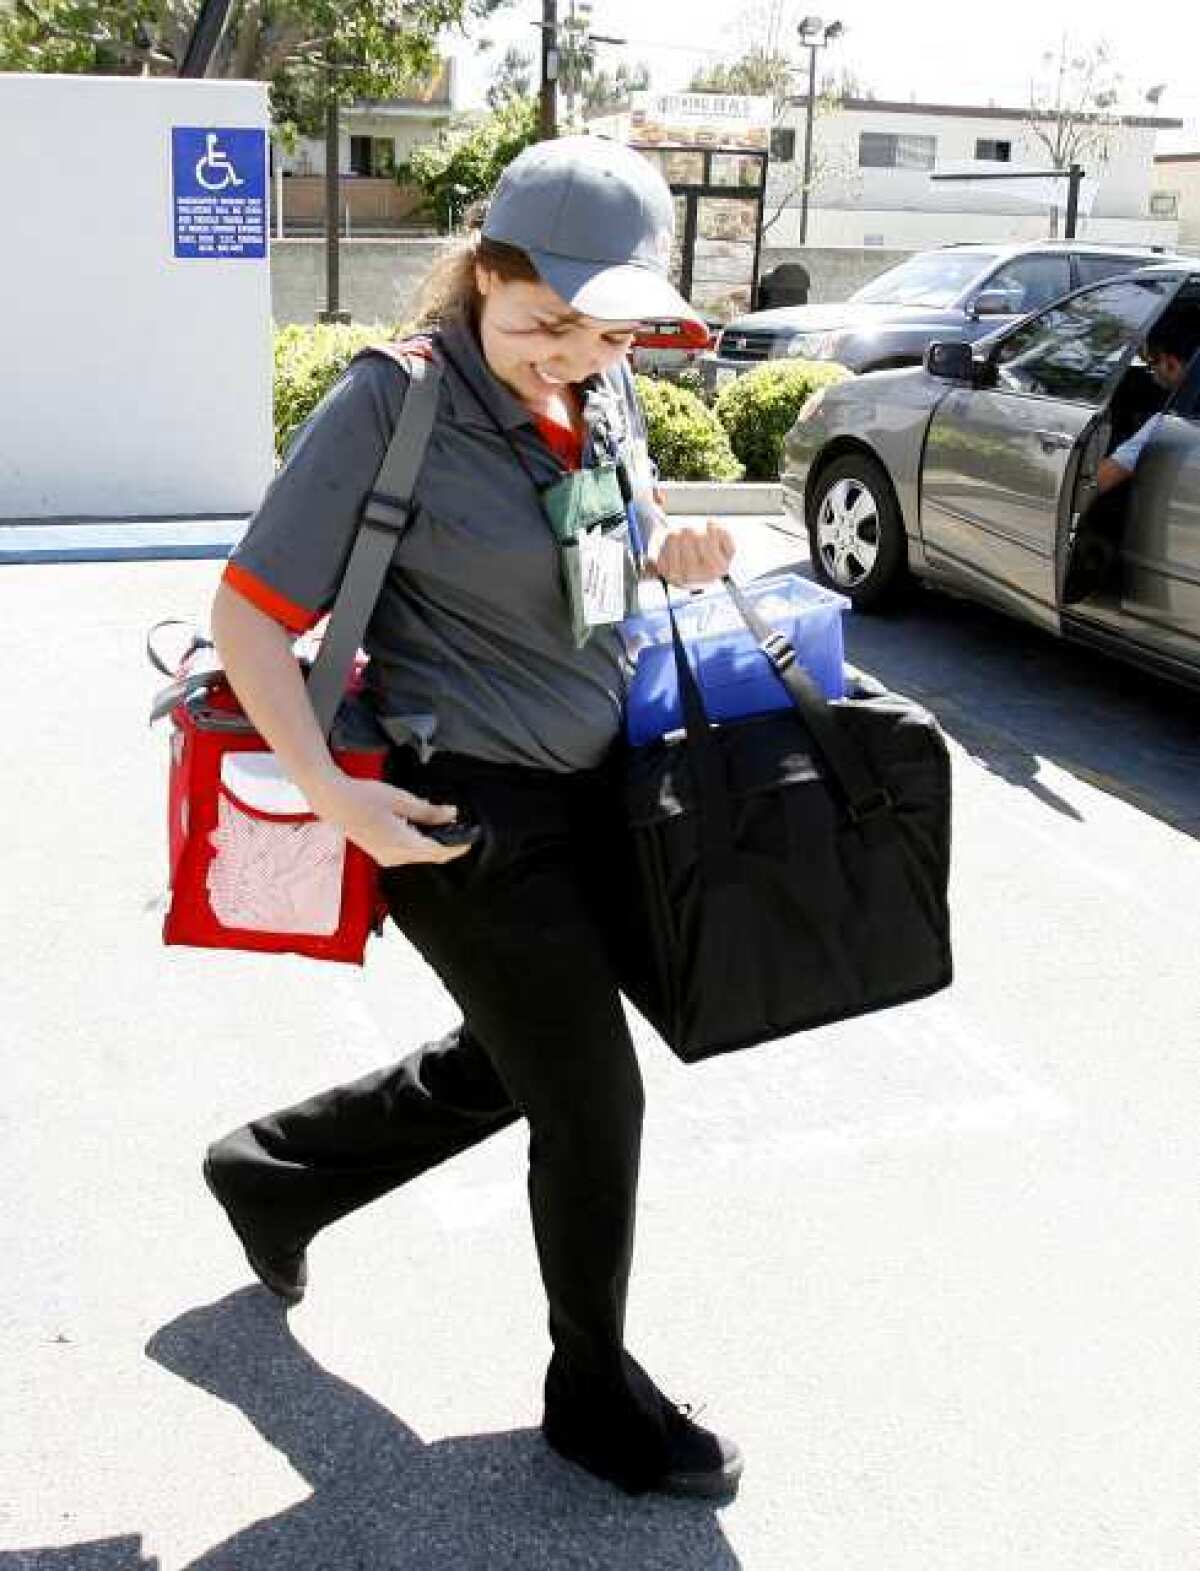 Patricia Camacho makes a delivery at Burger King on Central Avenue in Glendale.